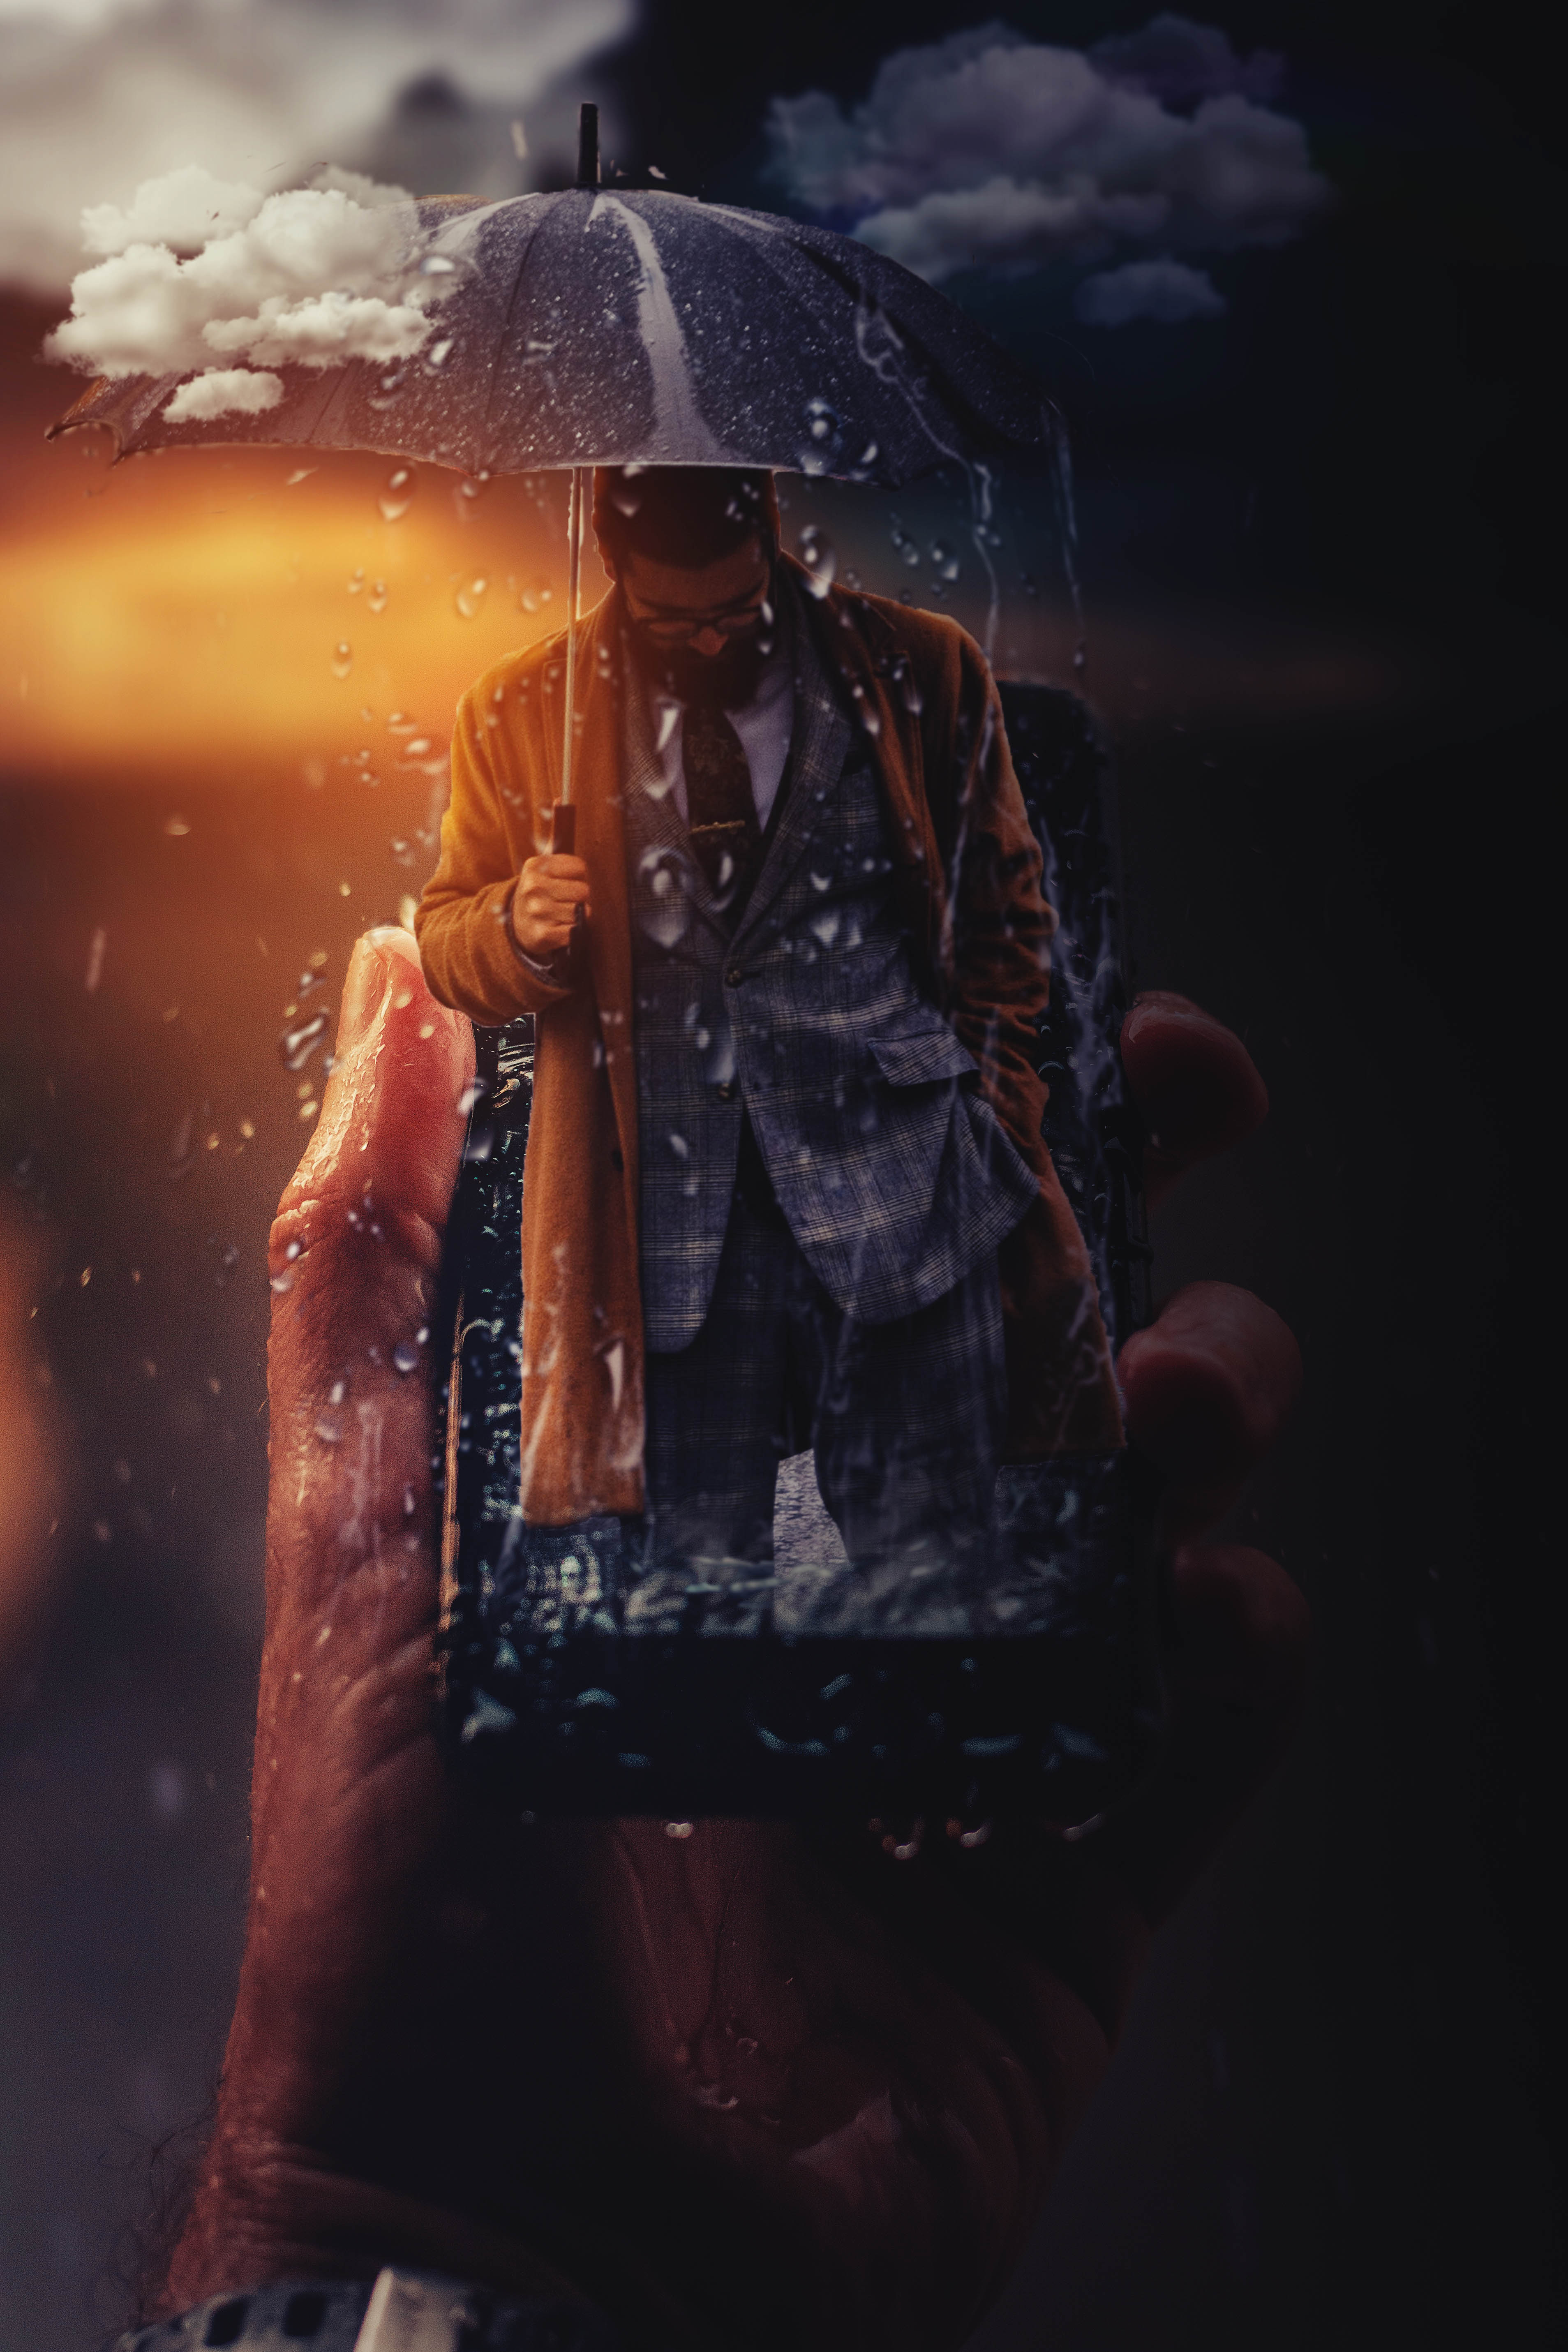 photo-of-person-holding-wet-smartphone-1826060-1.jpg